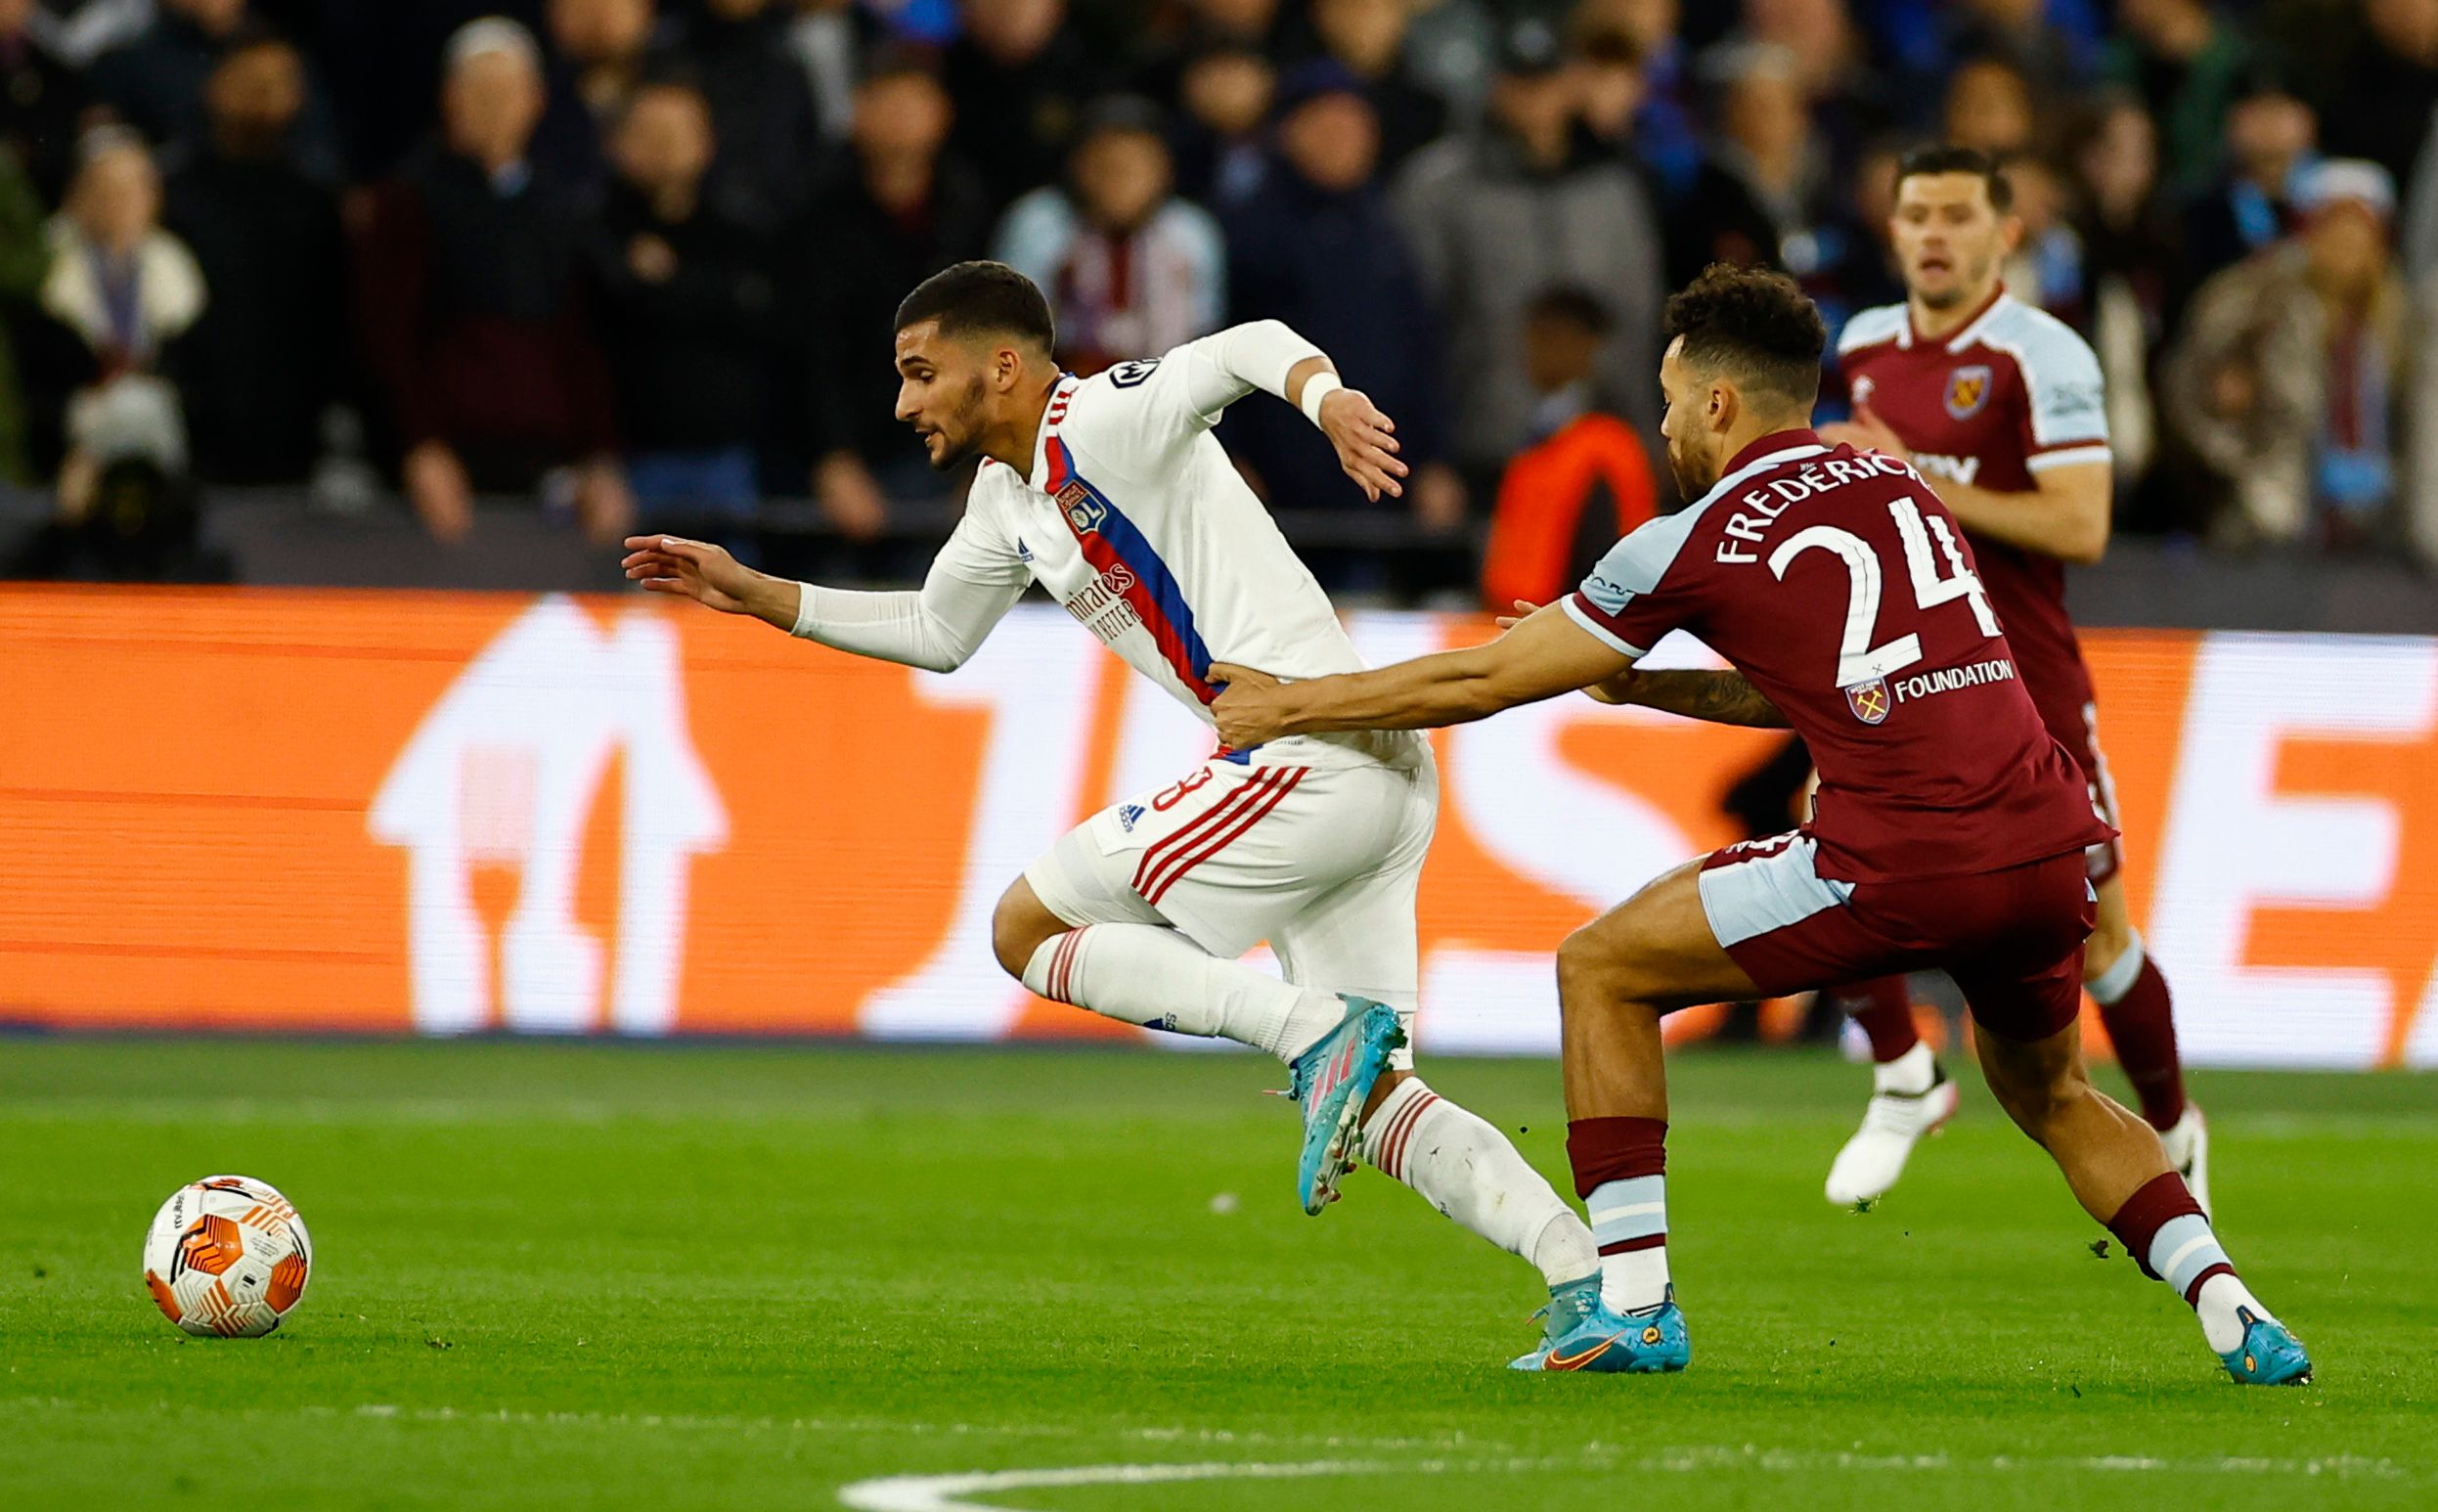 Soccer Football - Europa League - Quarter Final - First Leg - West Ham United v Olympique Lyonnais - London Stadium, London, Britain - April 7, 2022  Olympique Lyonnais' Houssem Aouar in action with West Ham United's Ryan Fredericks Action Images via Reuters/Andrew Boyers